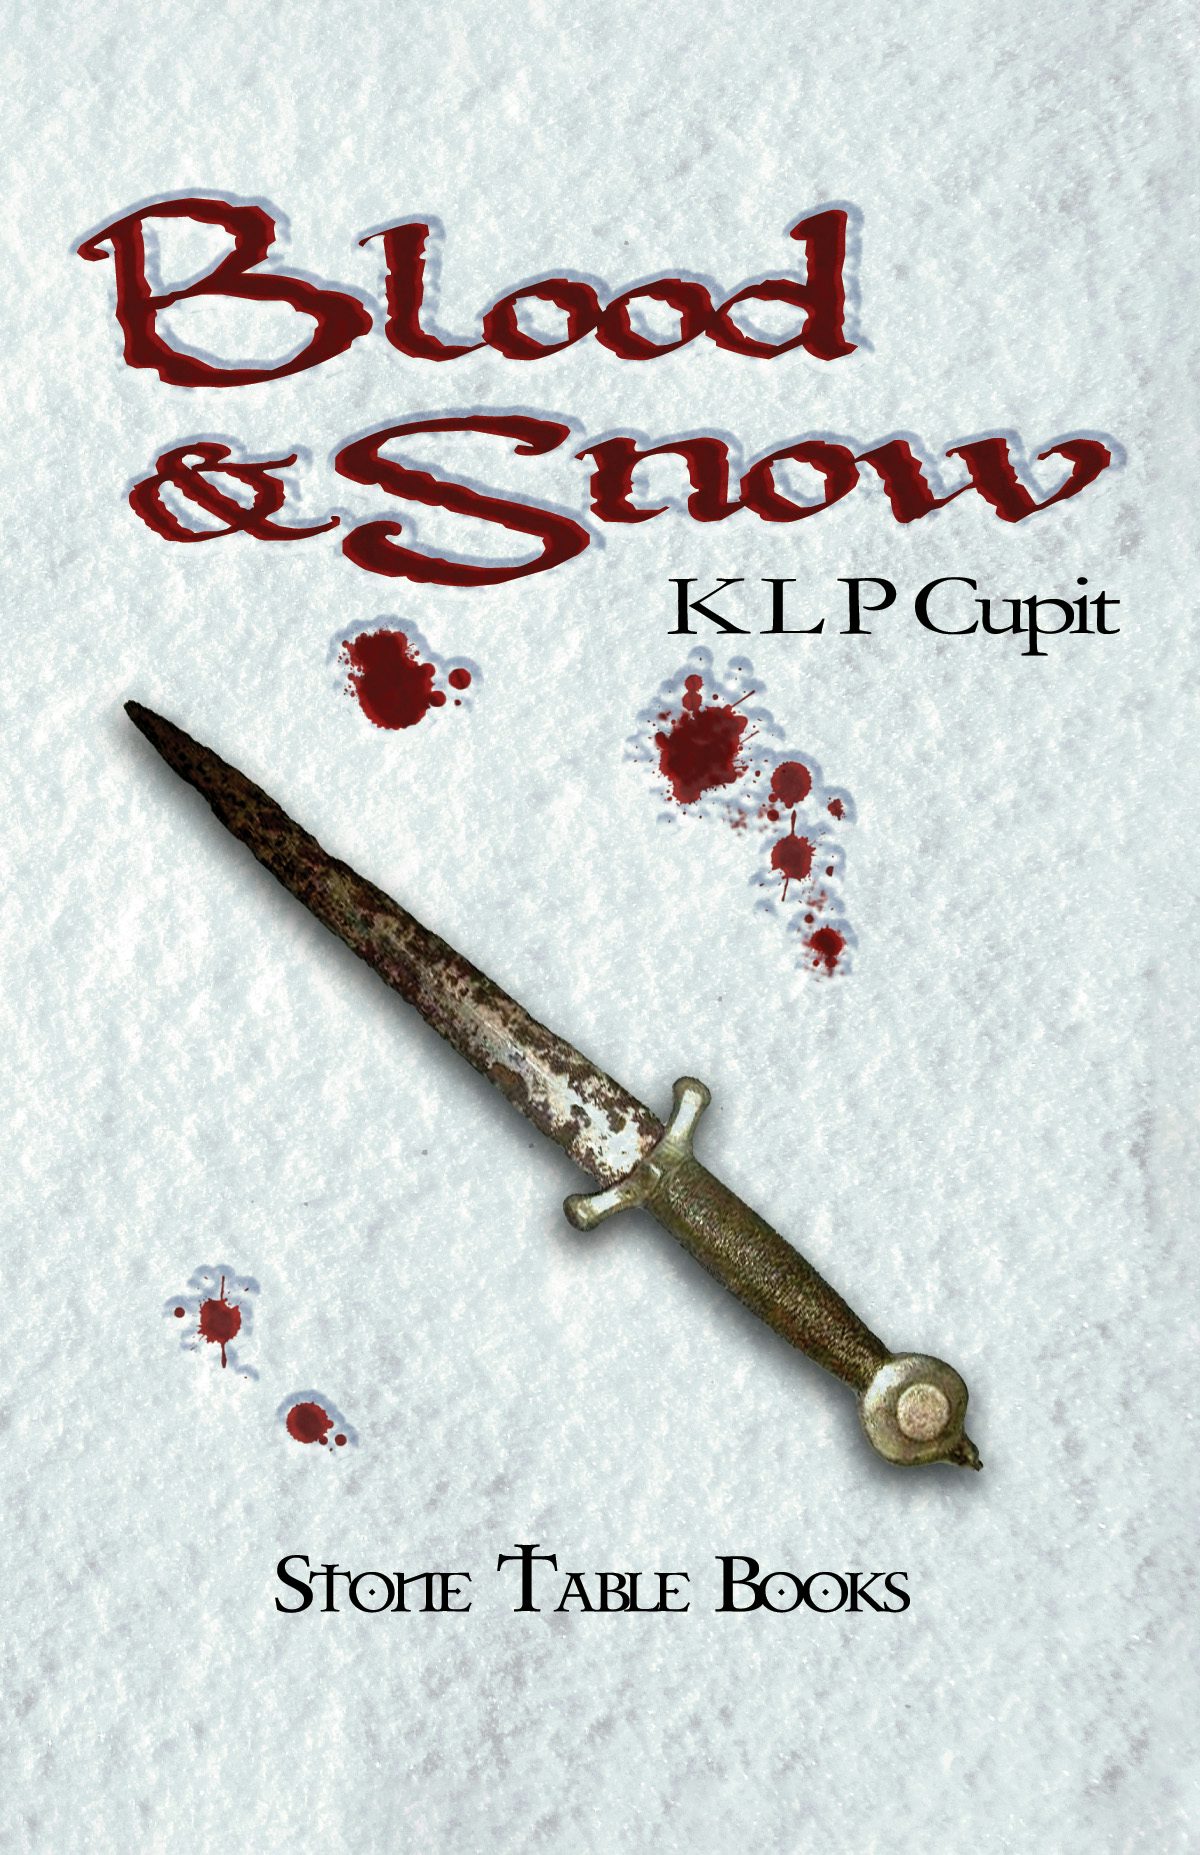 Of Blood & Snow by Danielle Belwater